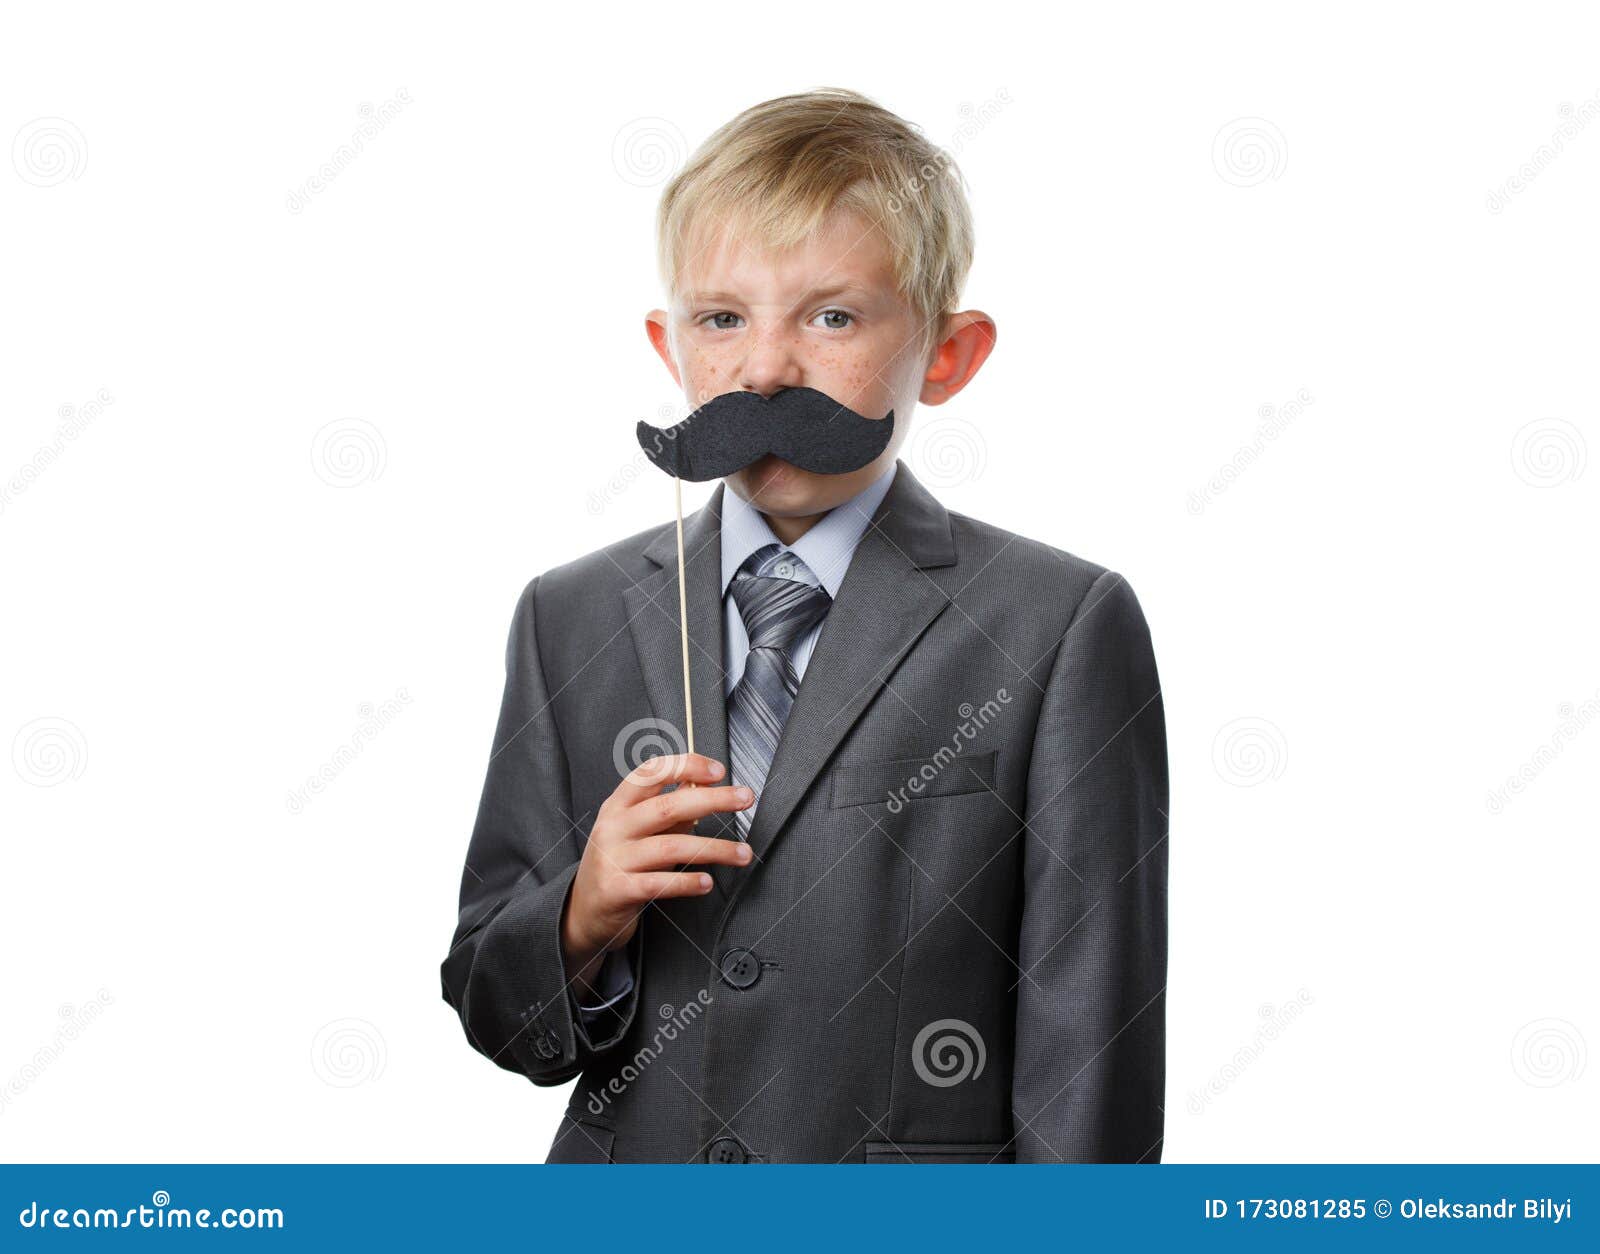 Child With A Mustache On White Isolated Background Stock Image - Image ...